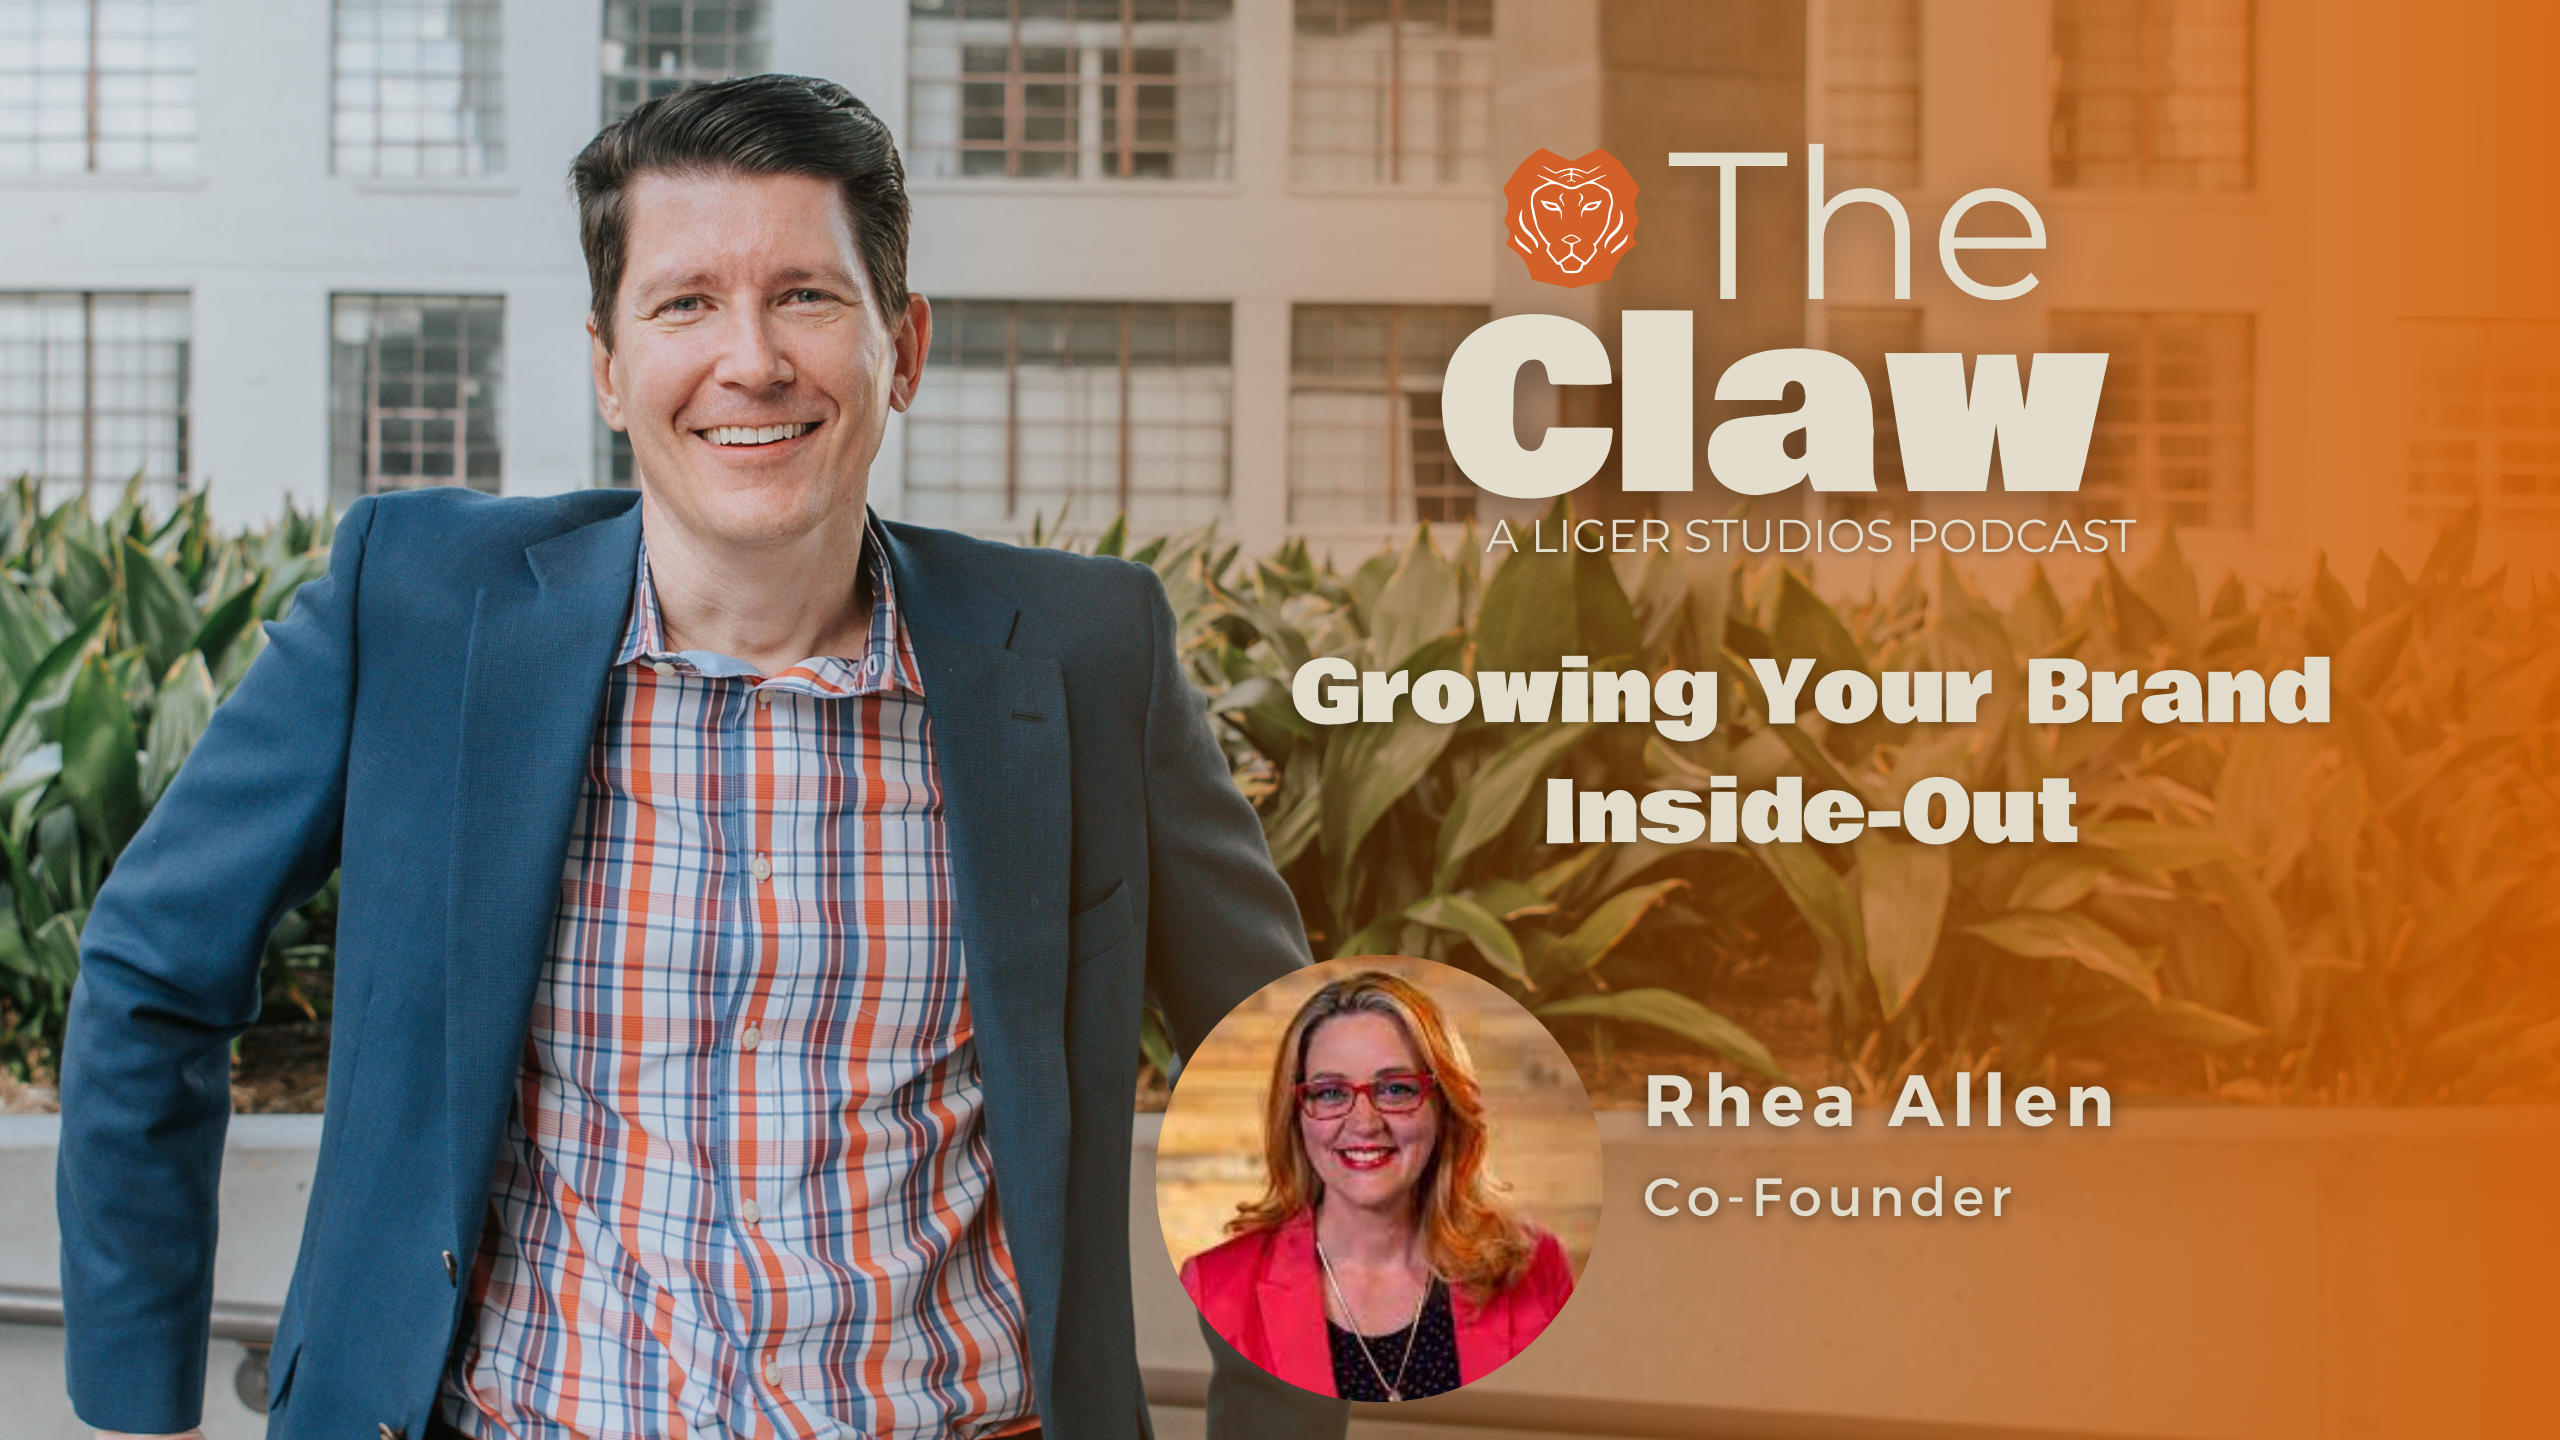 The Claw Podcast: Growing Your Brand Inside-Out with Rhea Allen